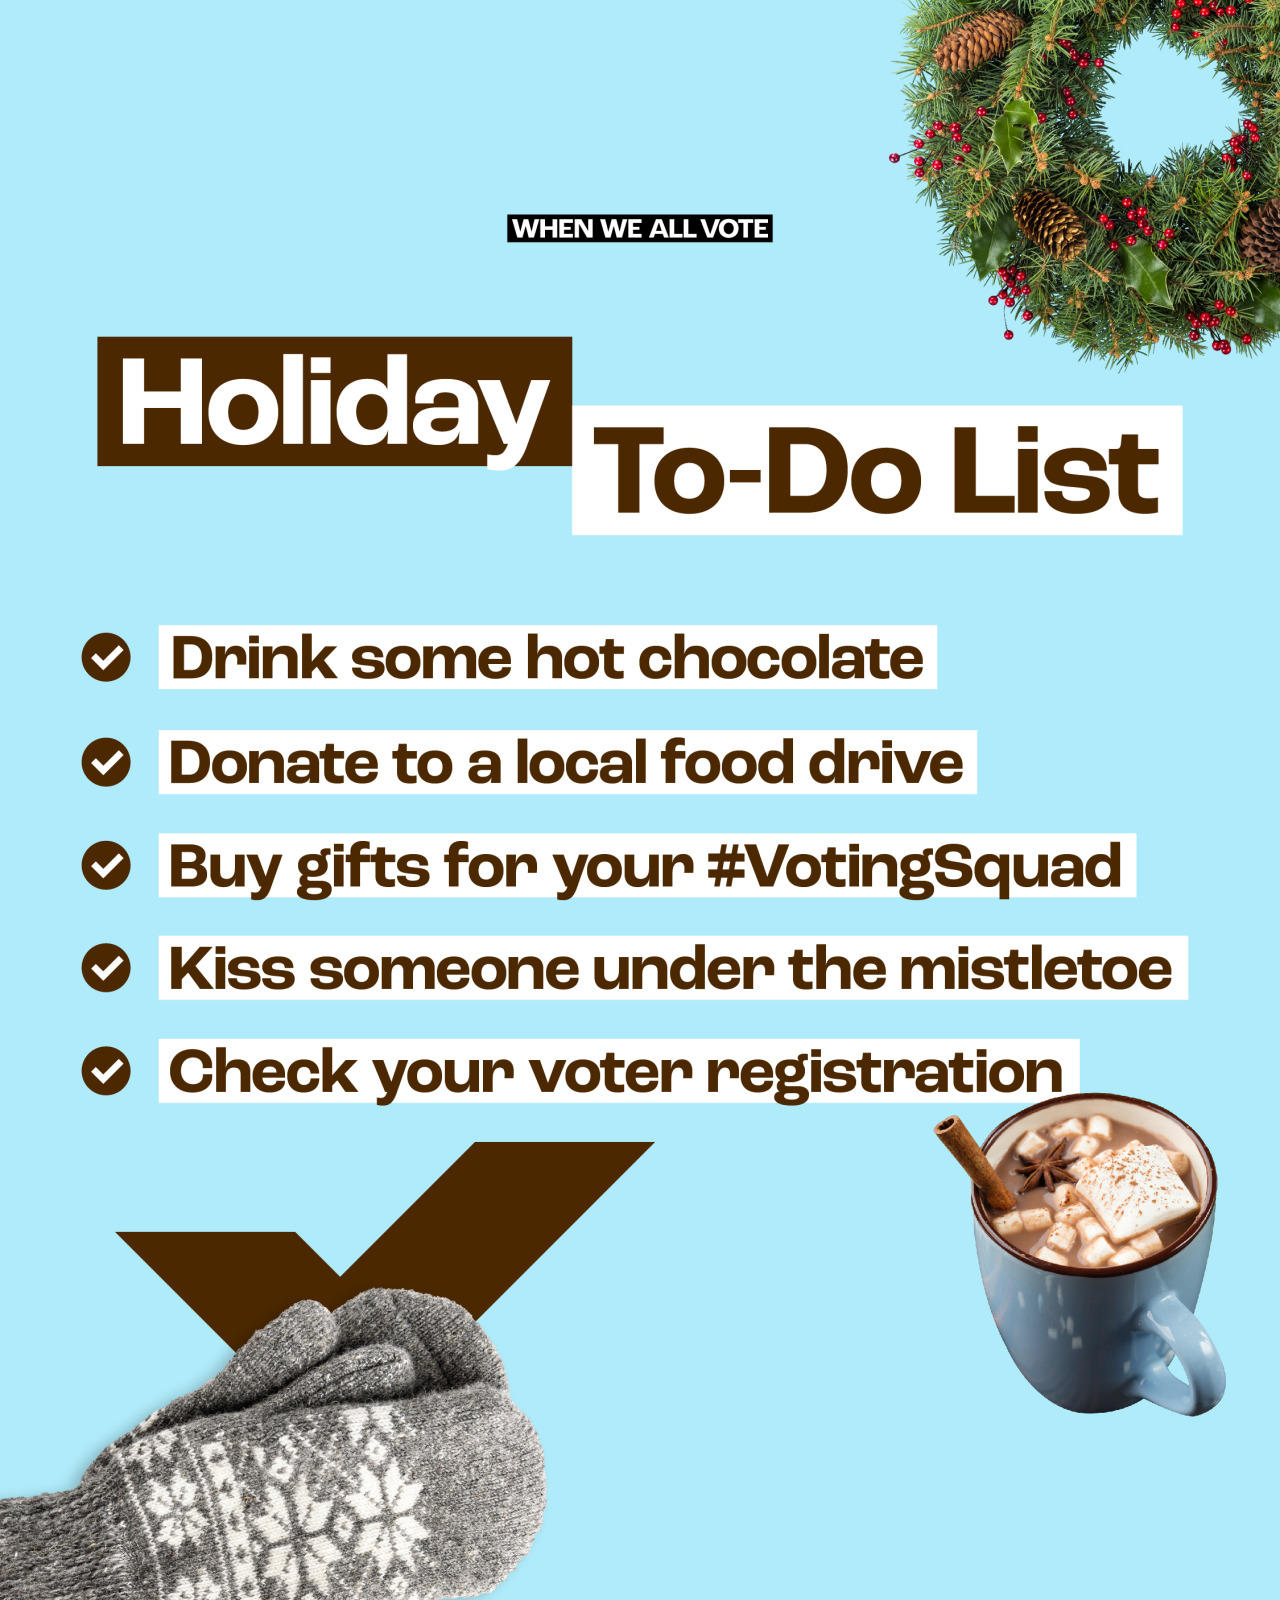 whenweallvote:
“Winter is coming…and all the holiday to-do’s have entered the chat! ❄️🎁☕Comment below how YOU plan to spread some holiday cheer this month (besides checking your voter registration at weall.vote/check of course 😉)”